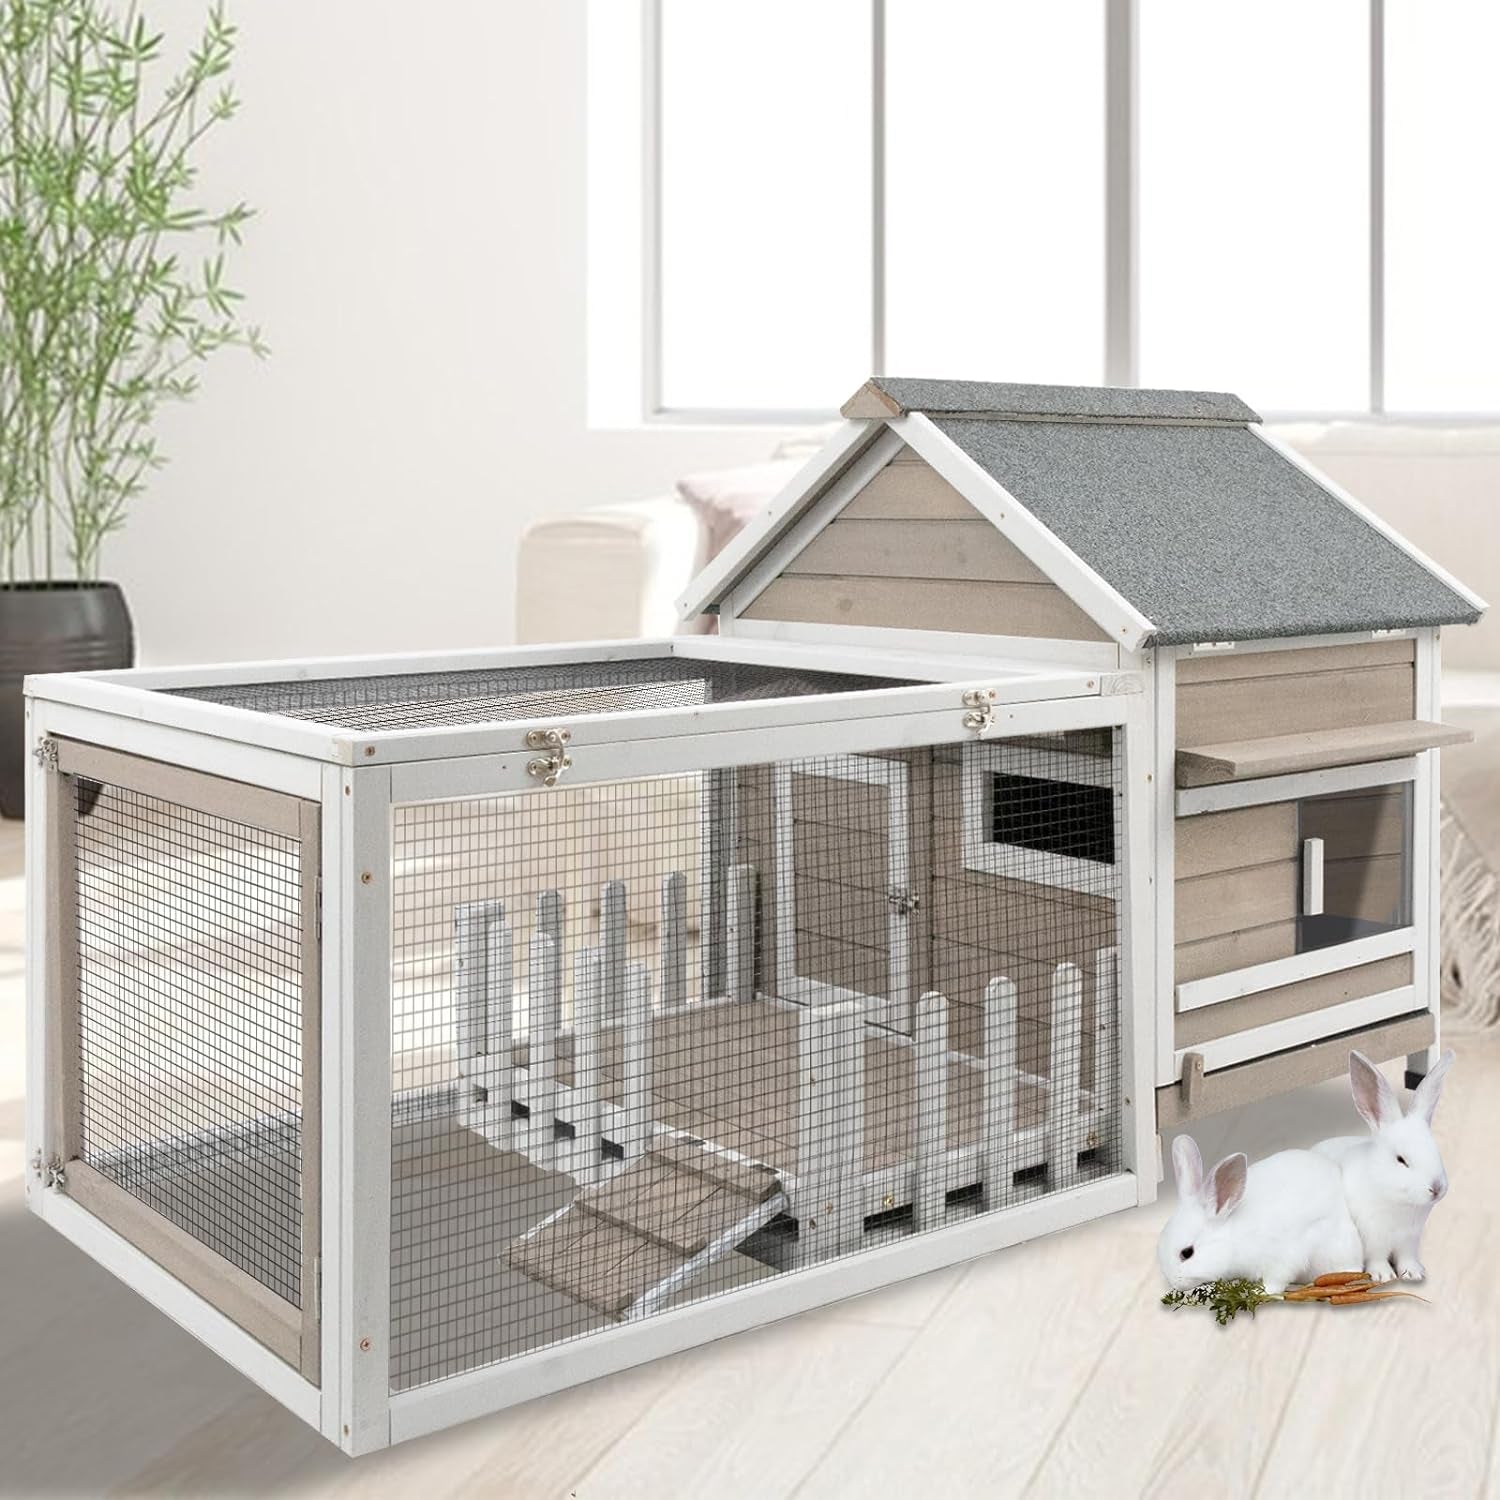 Outdoor Large Wooden Rabbit Hutch with White Picket Fence Front Porch Rabbit Cage with Run Indoor Bunny Hutch Guinea Pig Pet House Bunny Cage with Ramp, Pull Out Tray, Openable Asphalt Roof